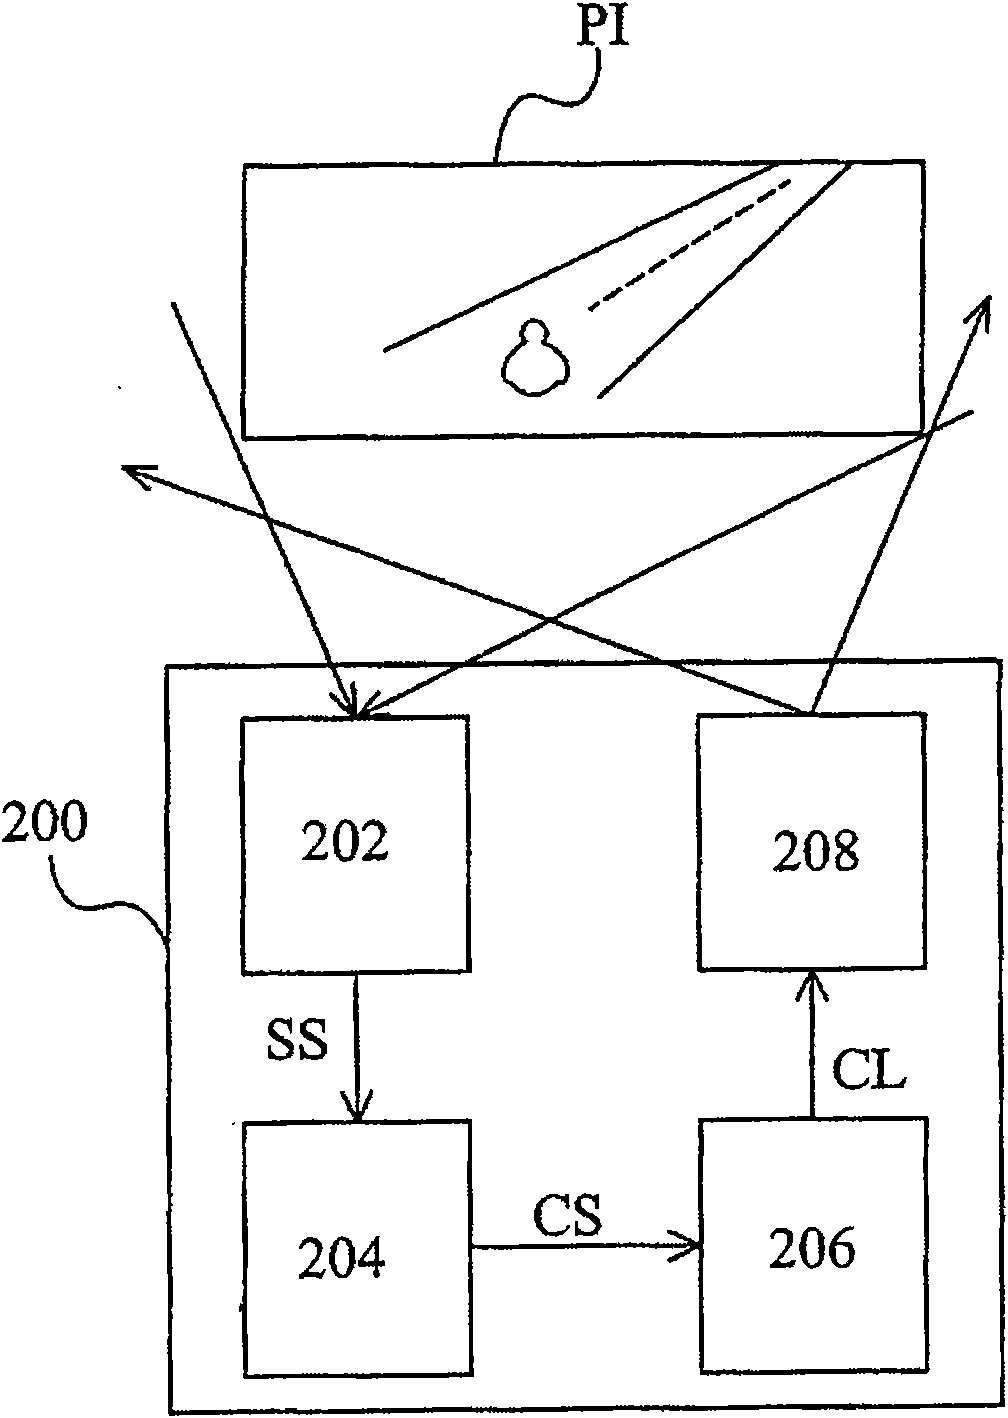 Projection device